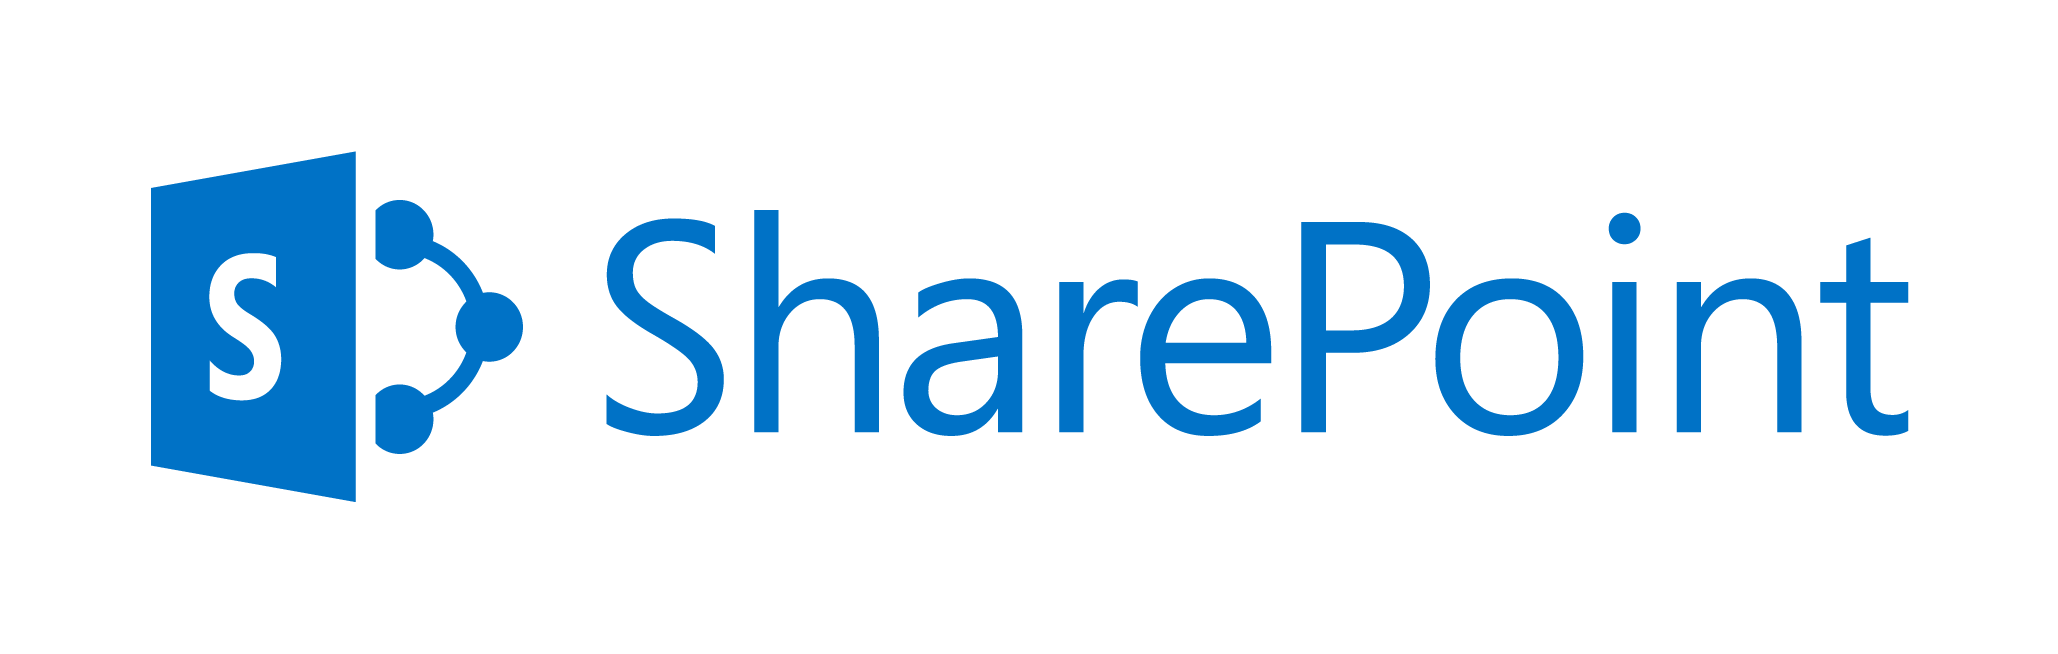 SharePoint-logo.png